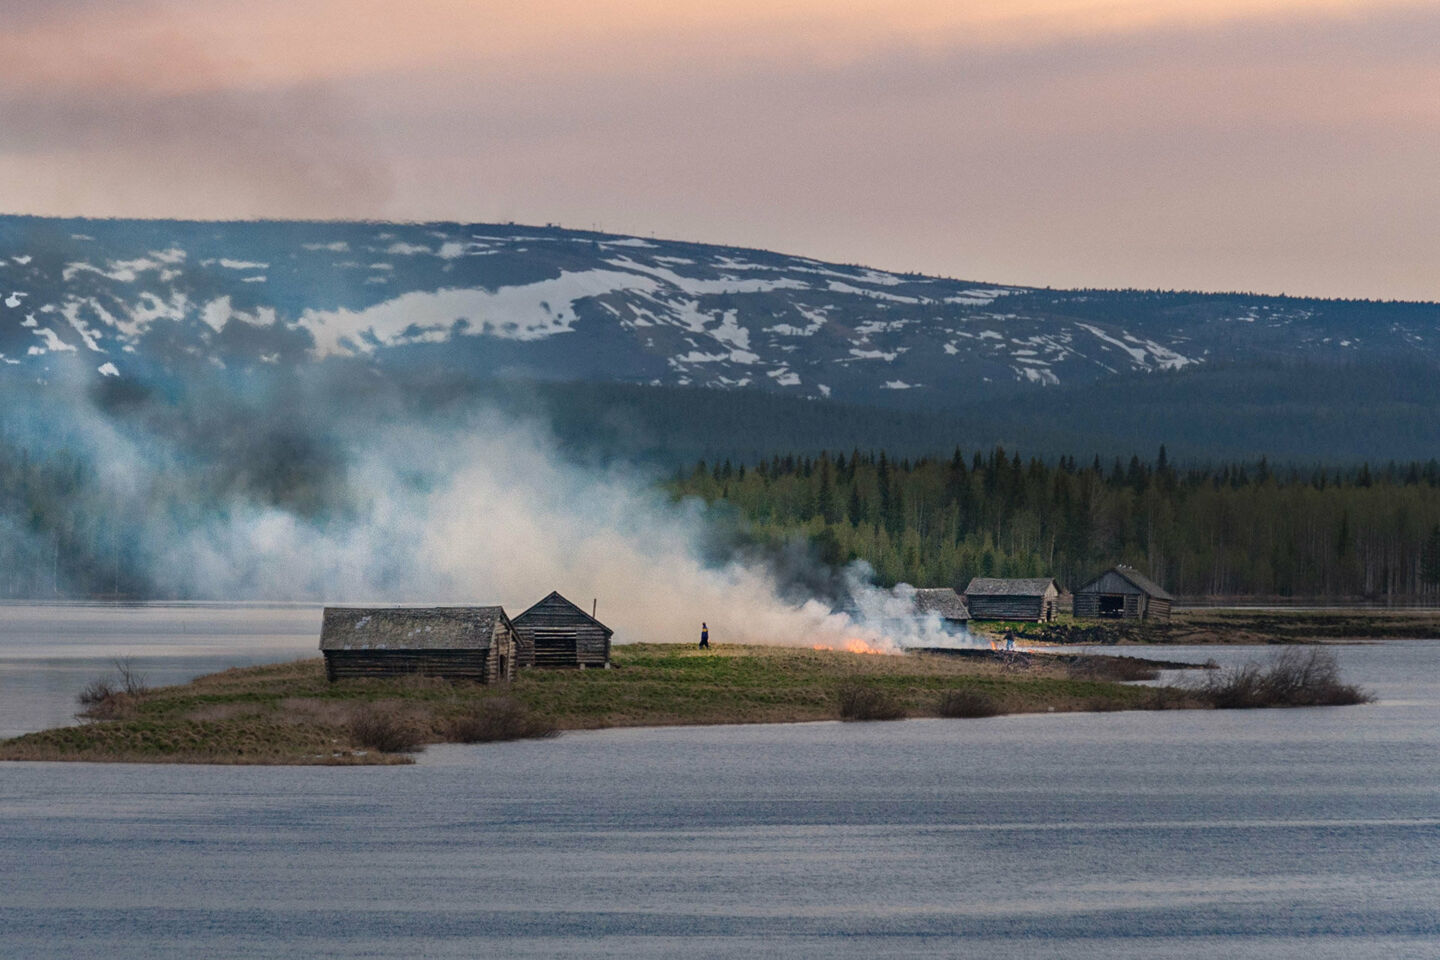 A summer evening in Suvanto, a 19th century village and filming location in Finnish Lapland